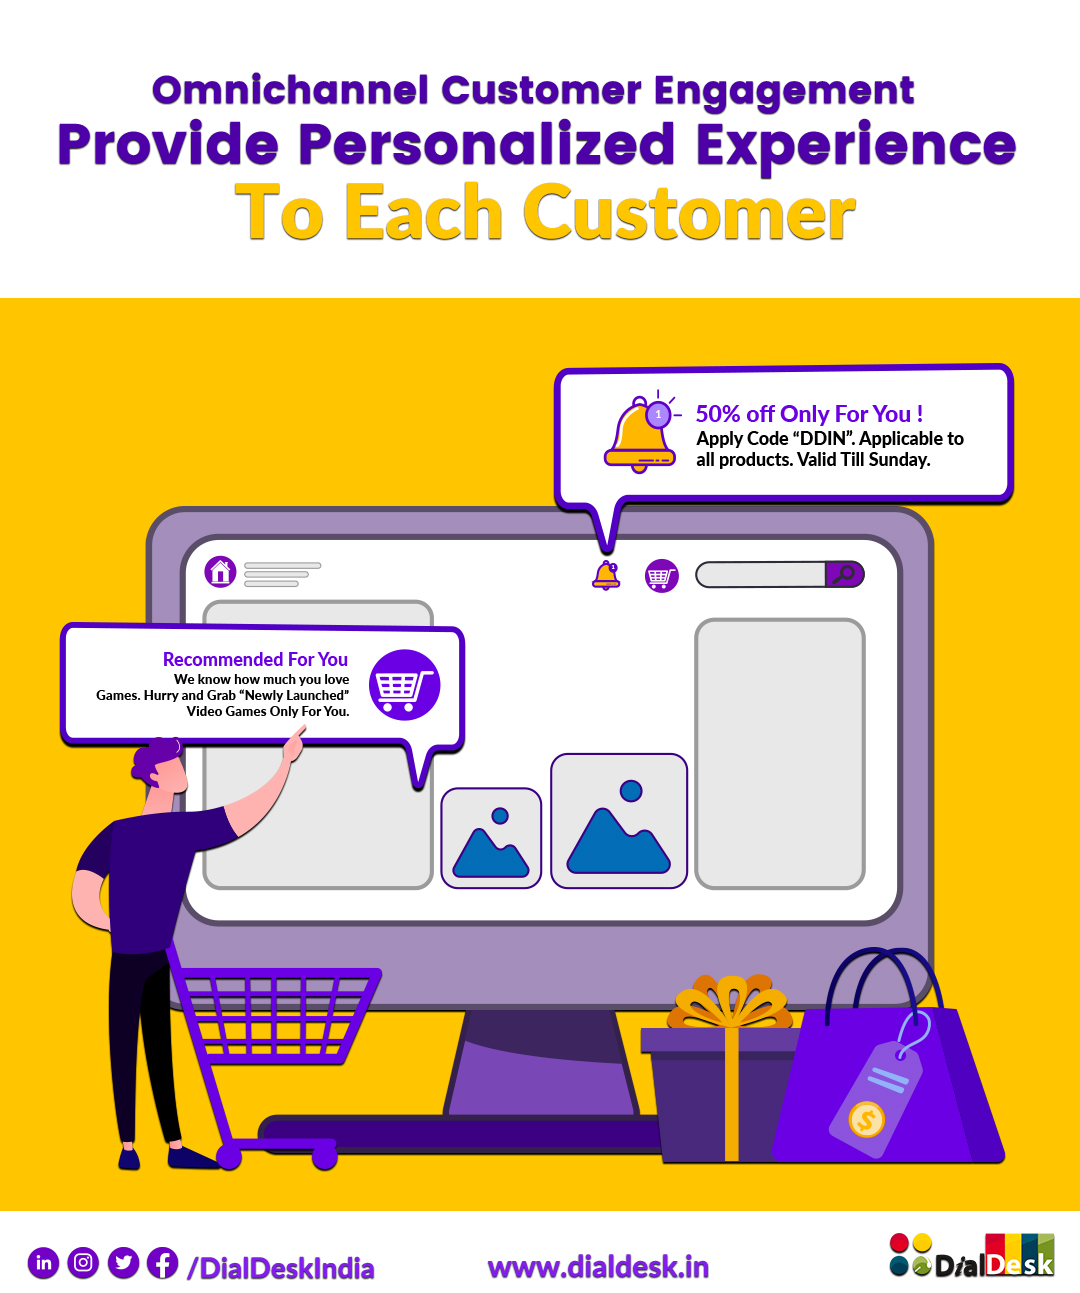 providing personalized and relevant experiences for each customer